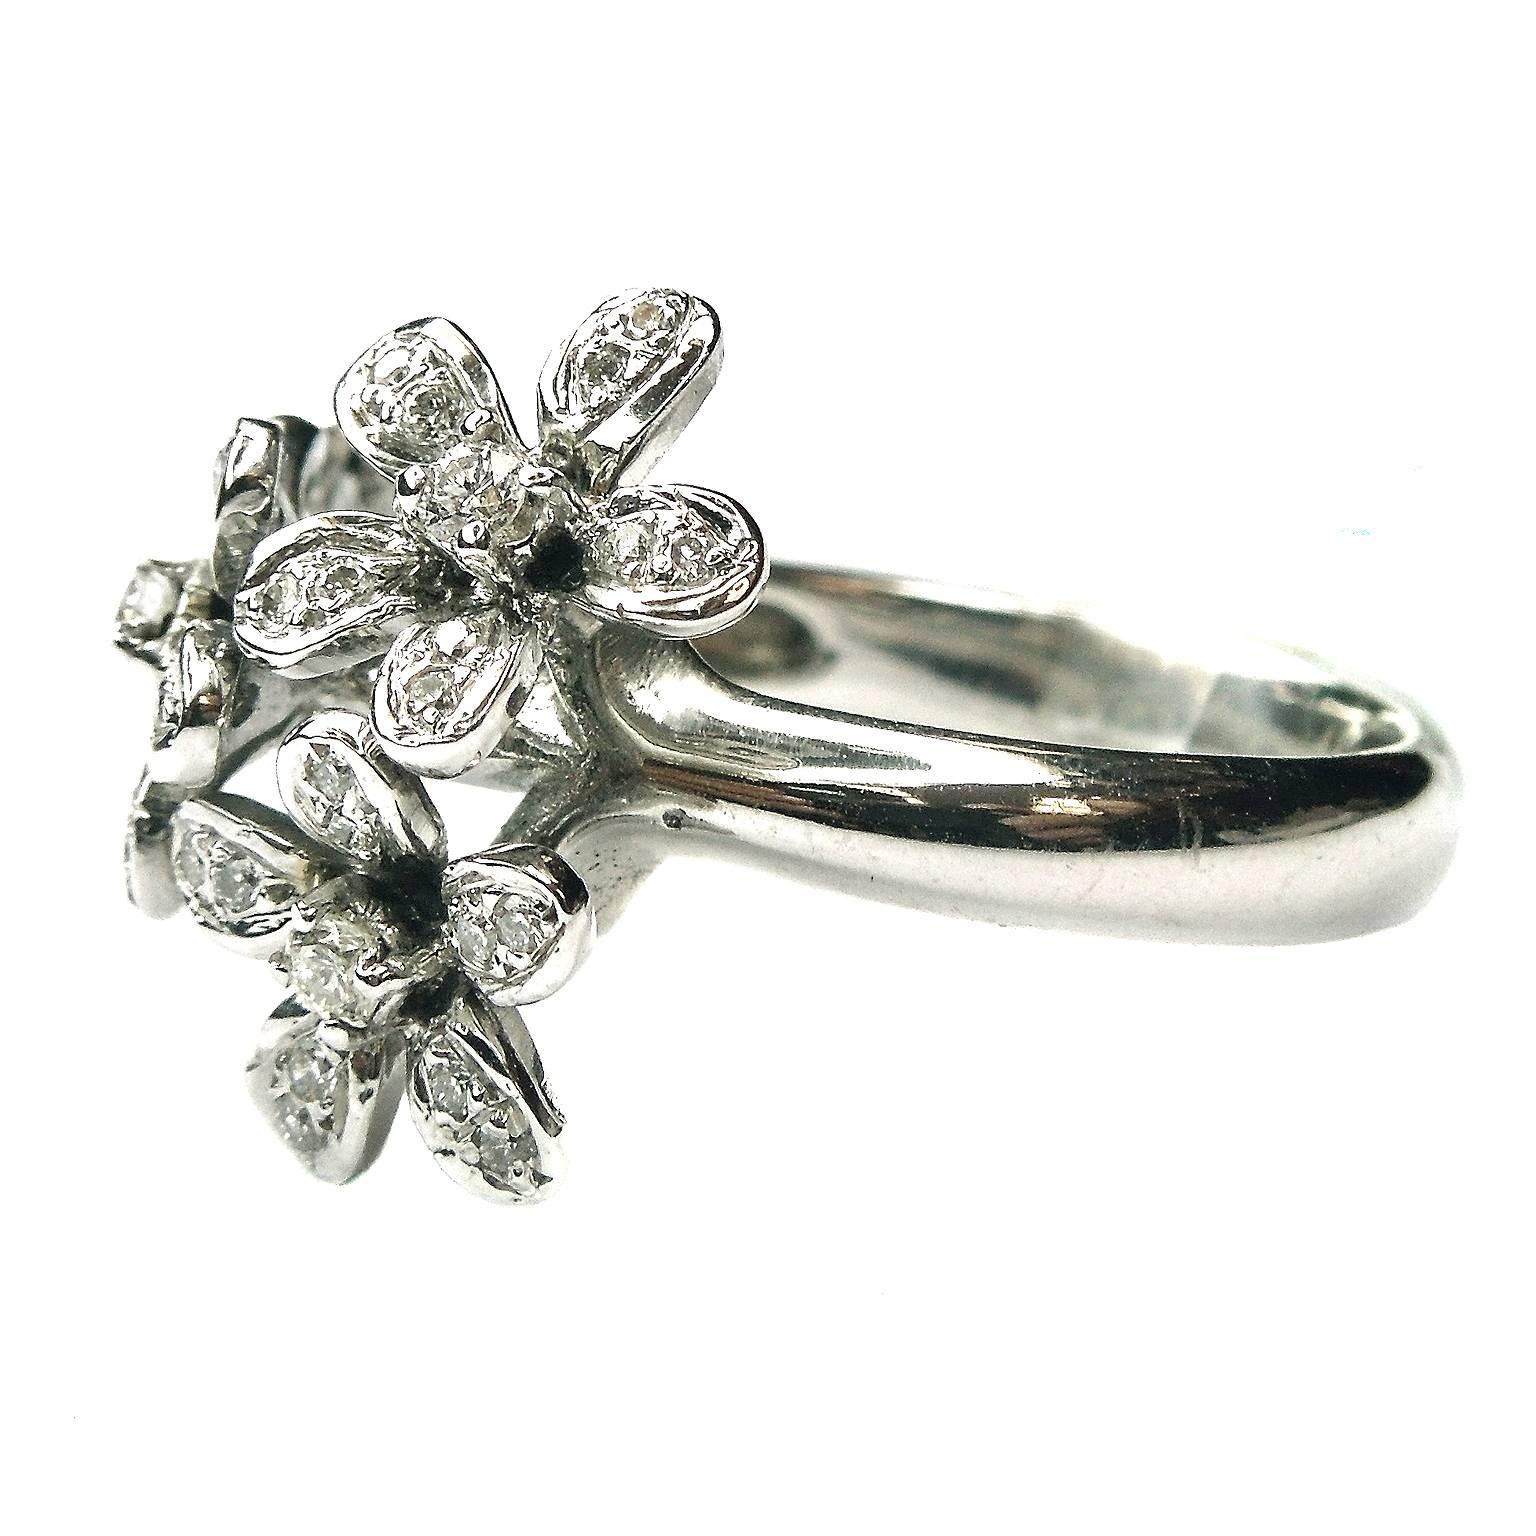 18K White Gold Floral Ring with Diamonds

0.35ct. G Color, VS Clarity Diamonds

4 Flowers make up face of the ring

6.69grams 18k gold

Currently size 5. Can be size up or down.

Face of ring 1 inch wide
0.10 inch band width

Made in Turkey

Estate